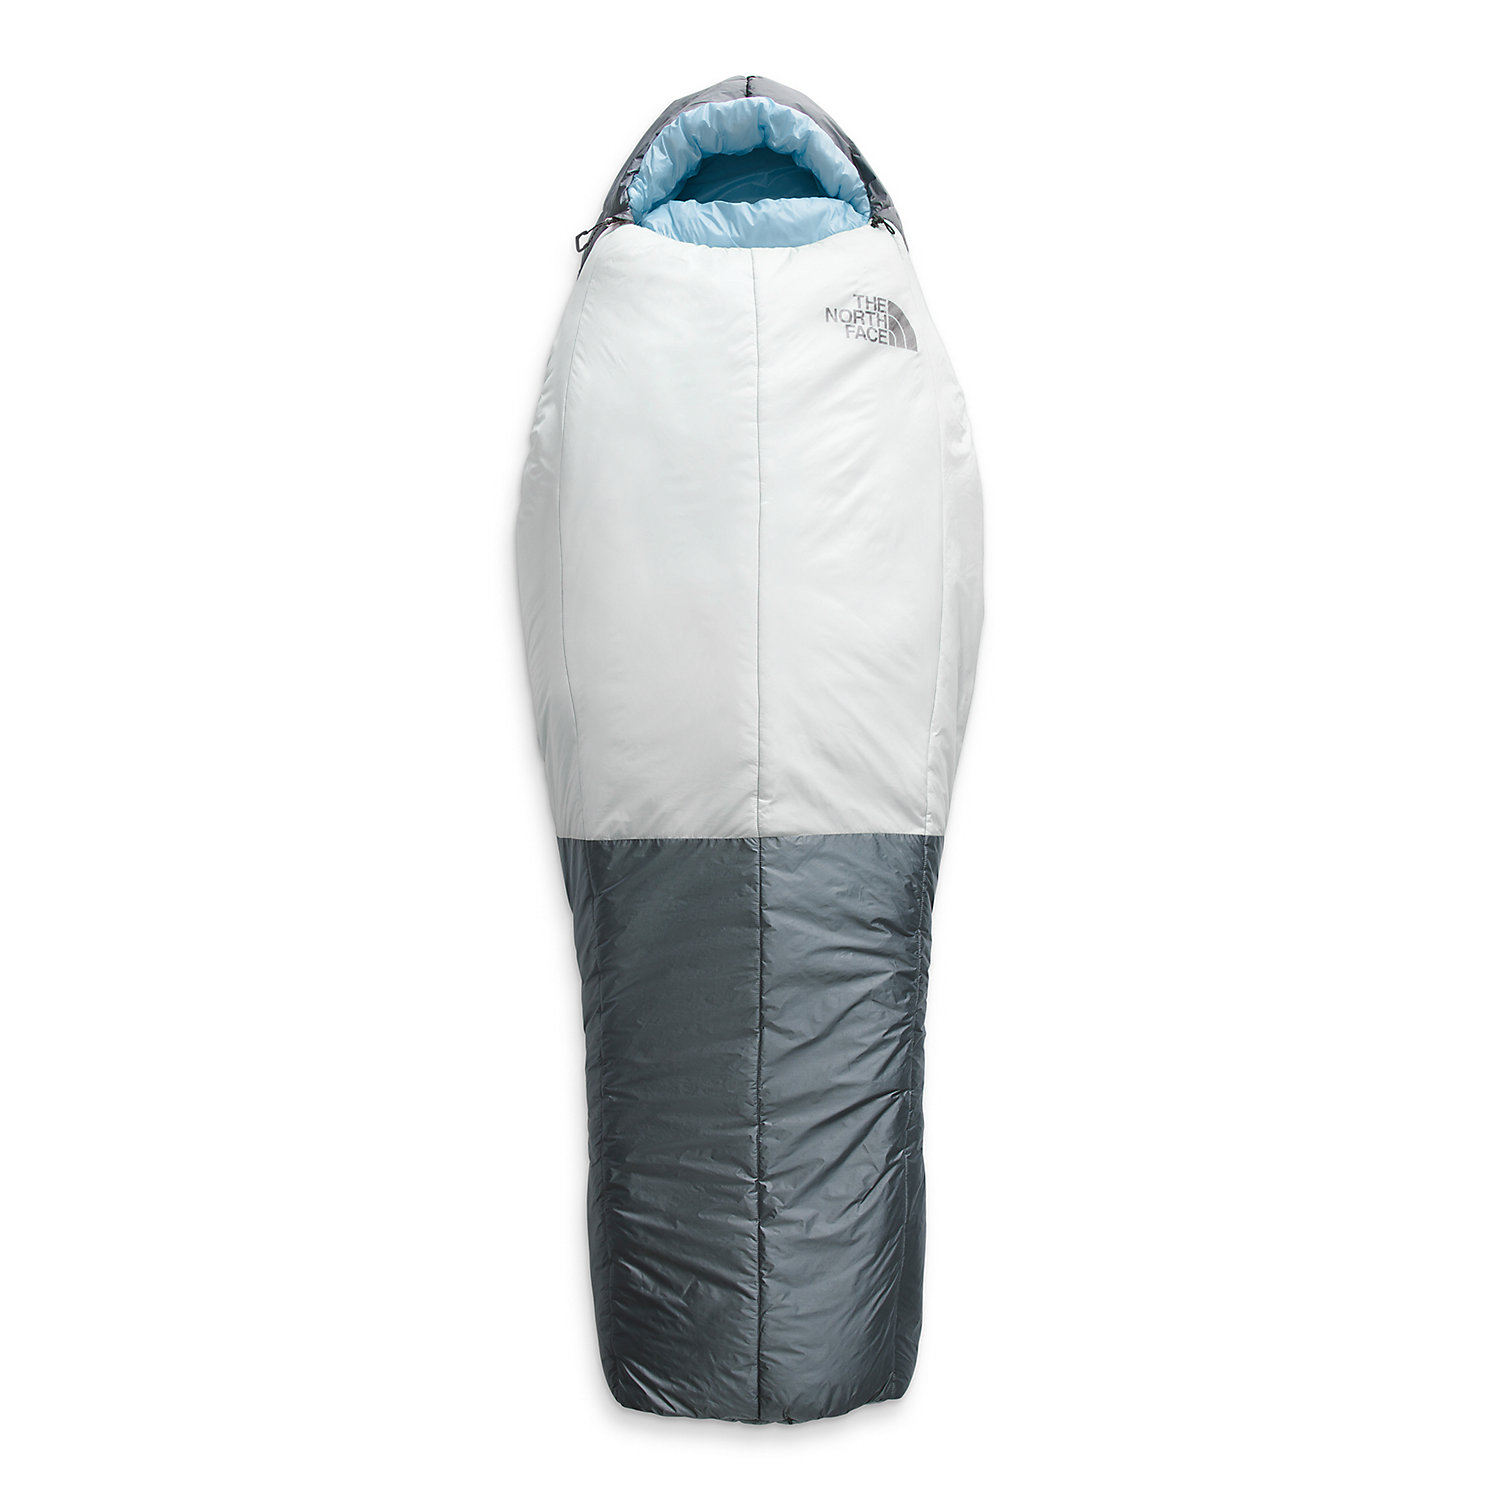 The North Face Womens Cats Meow Eco Sleeping Bag